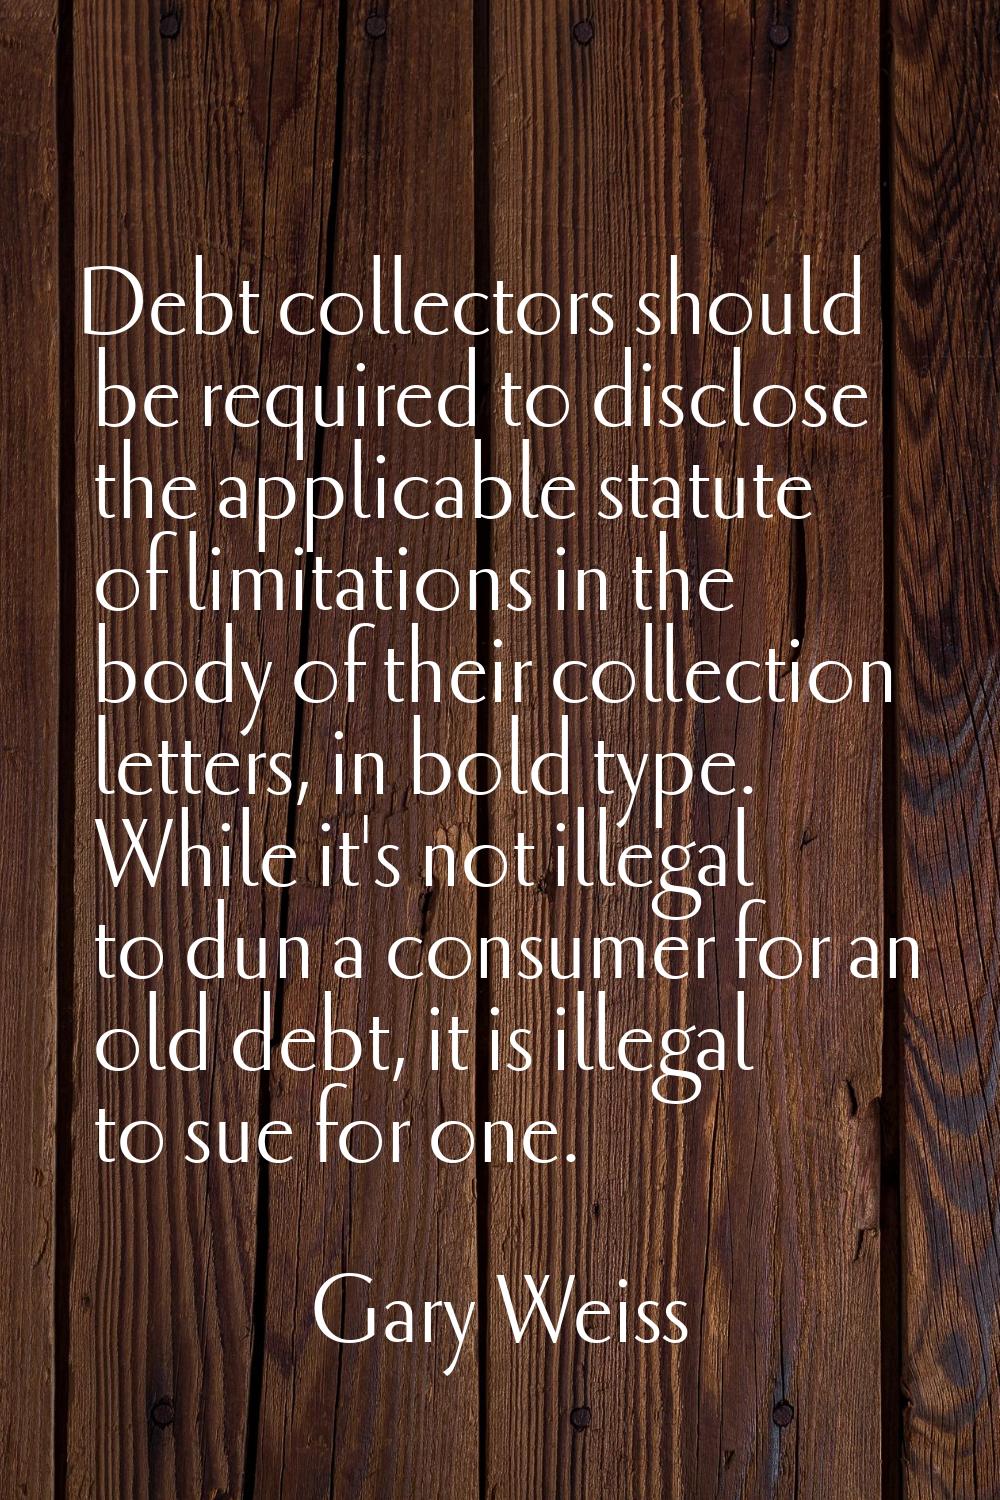 Debt collectors should be required to disclose the applicable statute of limitations in the body of